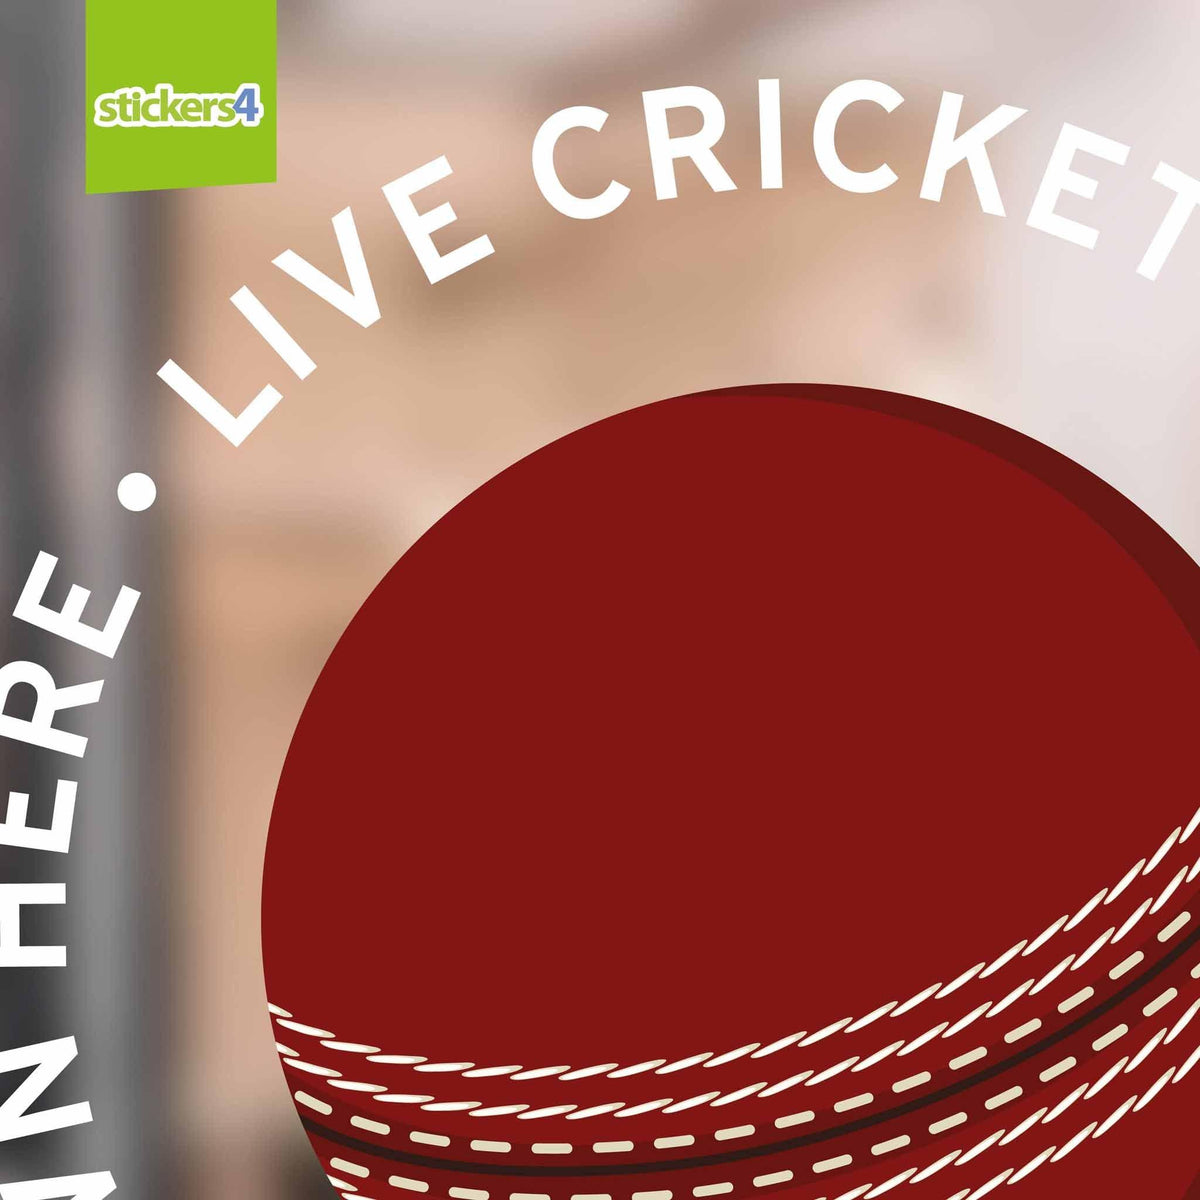 &quot;Live Cricket Shown Here&quot; Roundel Window Sticker Events